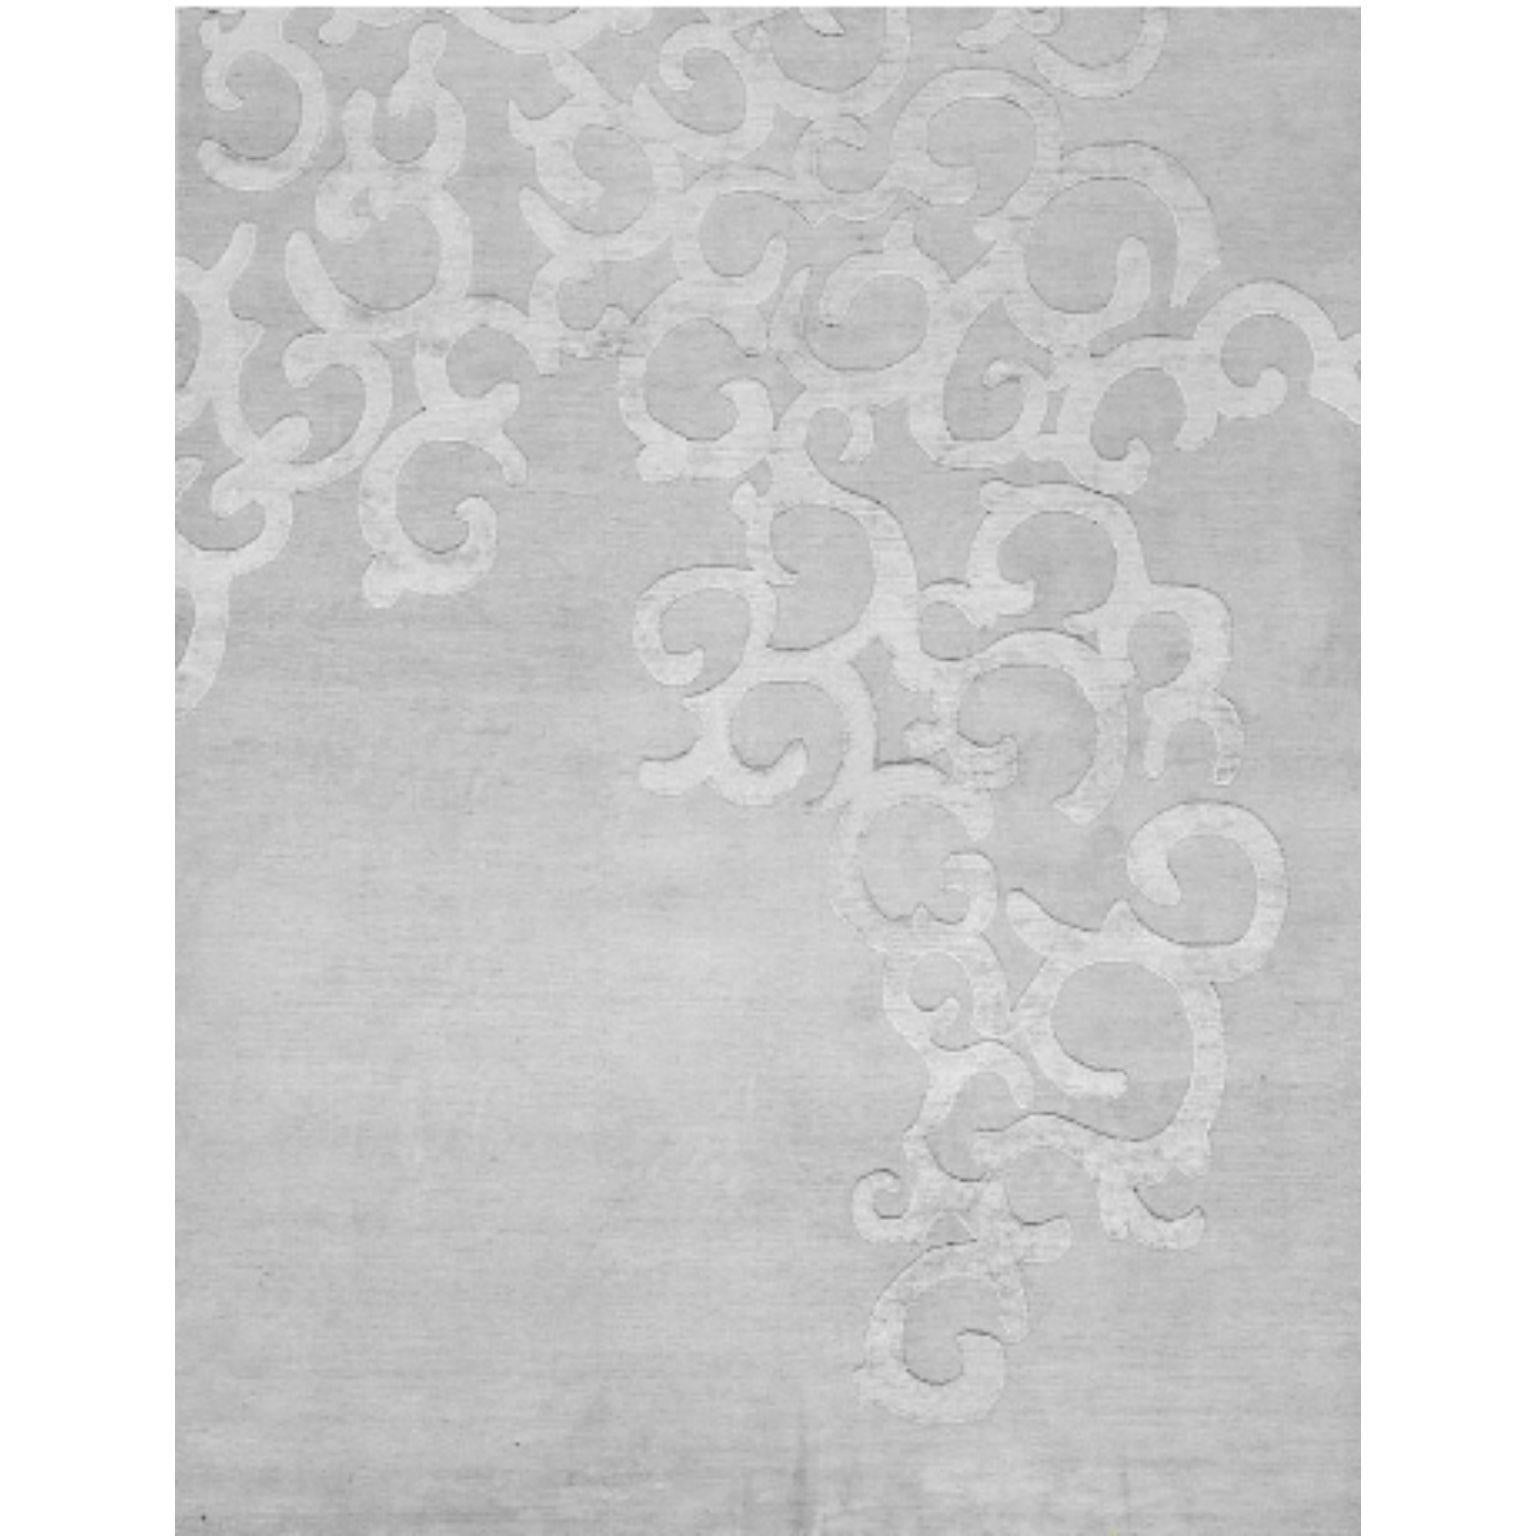 MEMENTO 200 rug by Illulian
Dimensions: D300 x H200 cm 
Materials: wool 50%, silk 50%
Variations available and prices may vary according to materials and sizes.

Illulian, historic and prestigious rug company brand, internationally renowned in